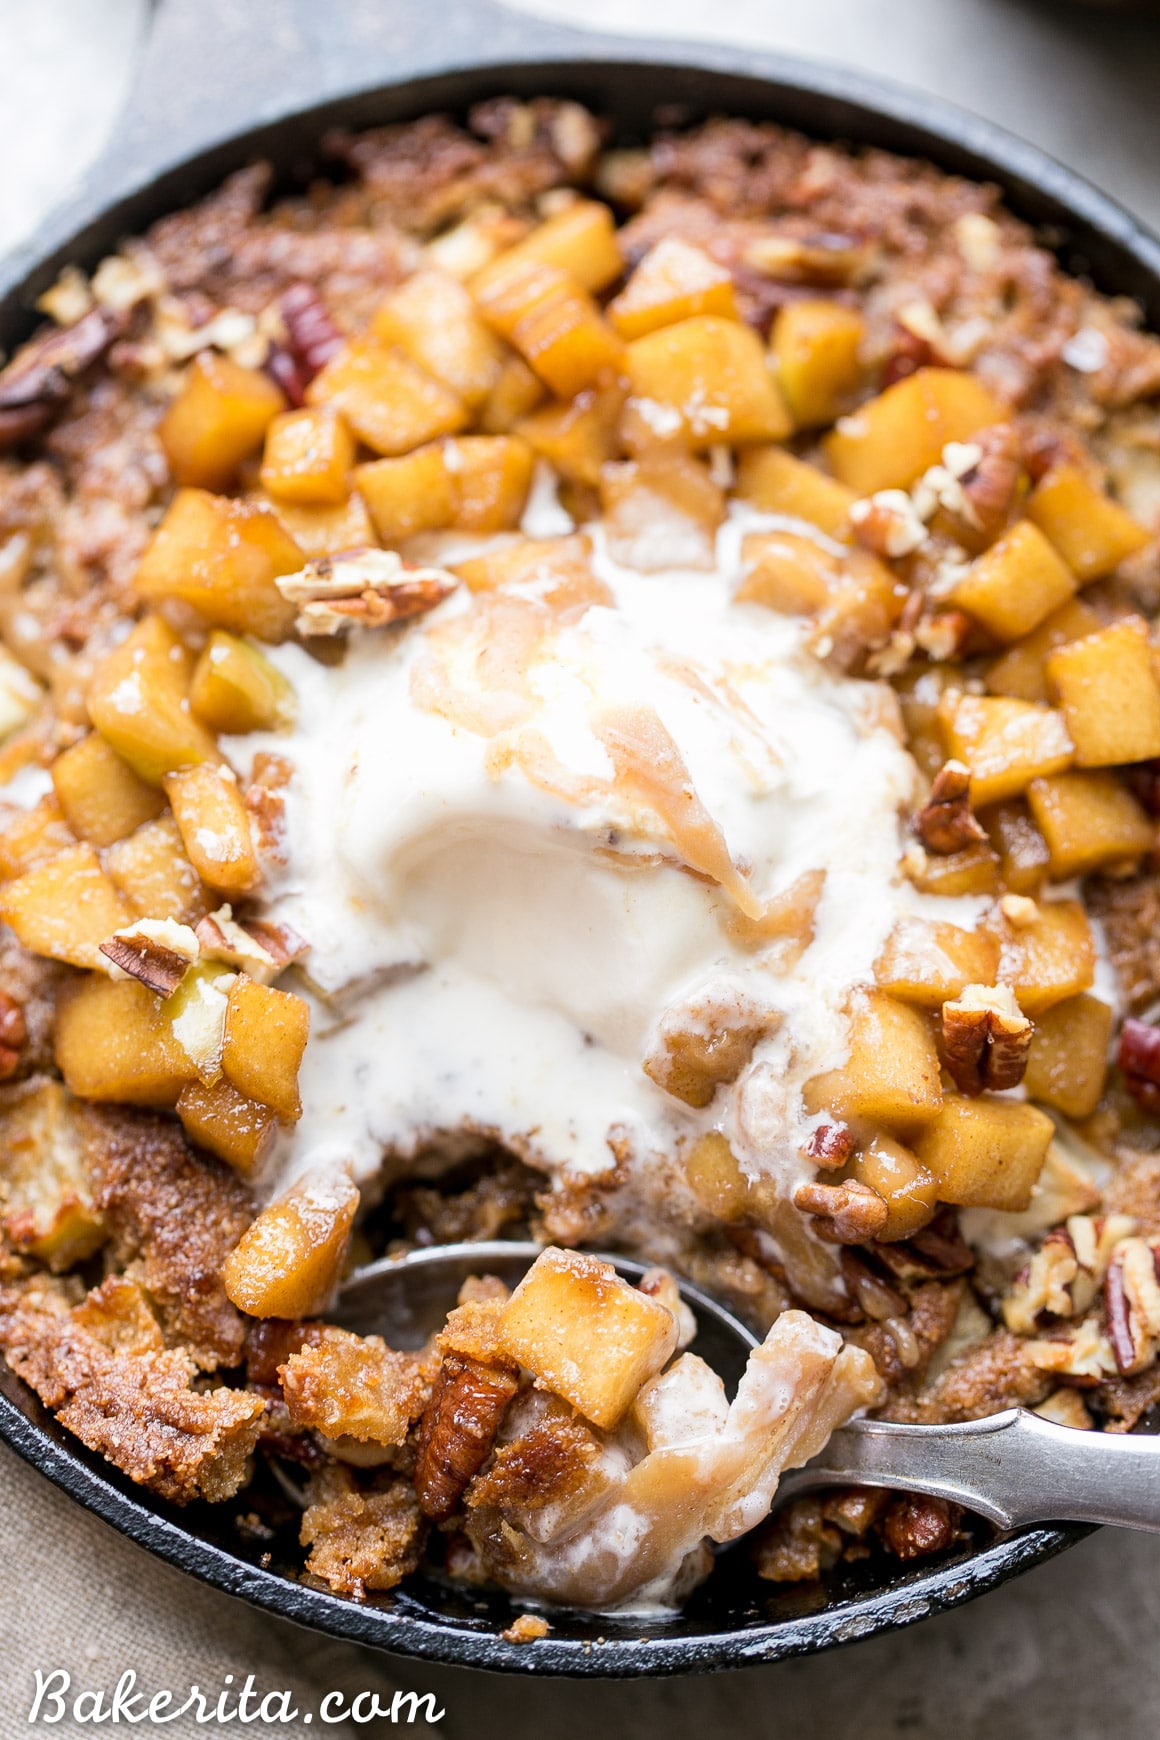 This Apple Cinnamon Skillet Cookie is a deep-dish spiced cookie that's loaded with fresh diced apples and warm fall spices! This gluten-free, refined sugar-free, and Paleo-friendly skillet cookie is topped with caramelized apples.